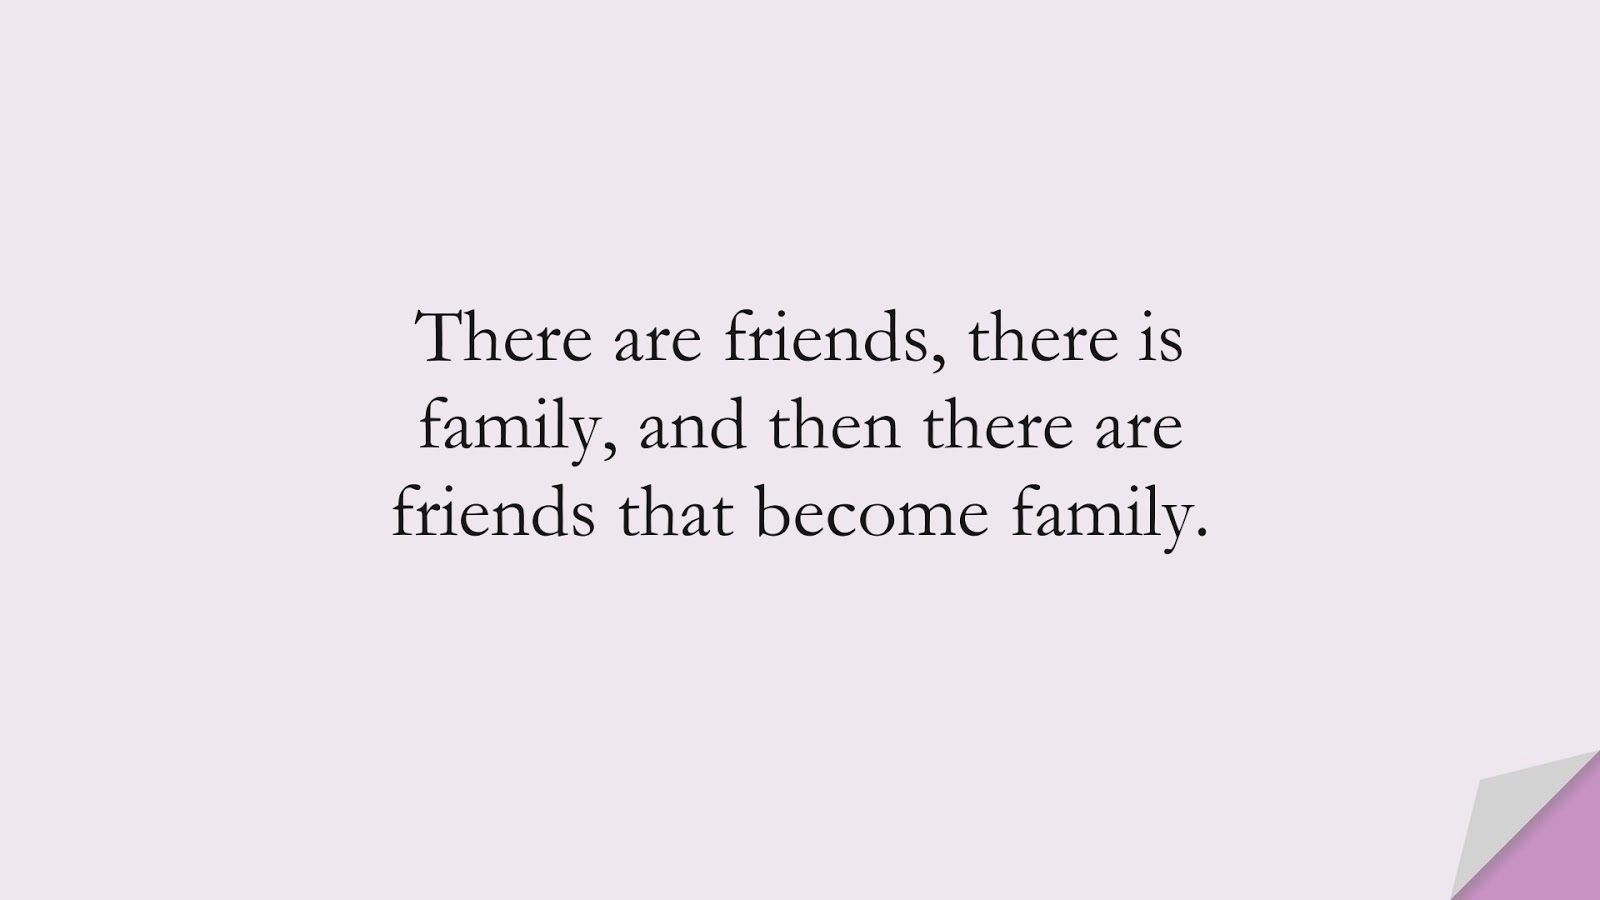 There are friends, there is family, and then there are friends that become family.FALSE